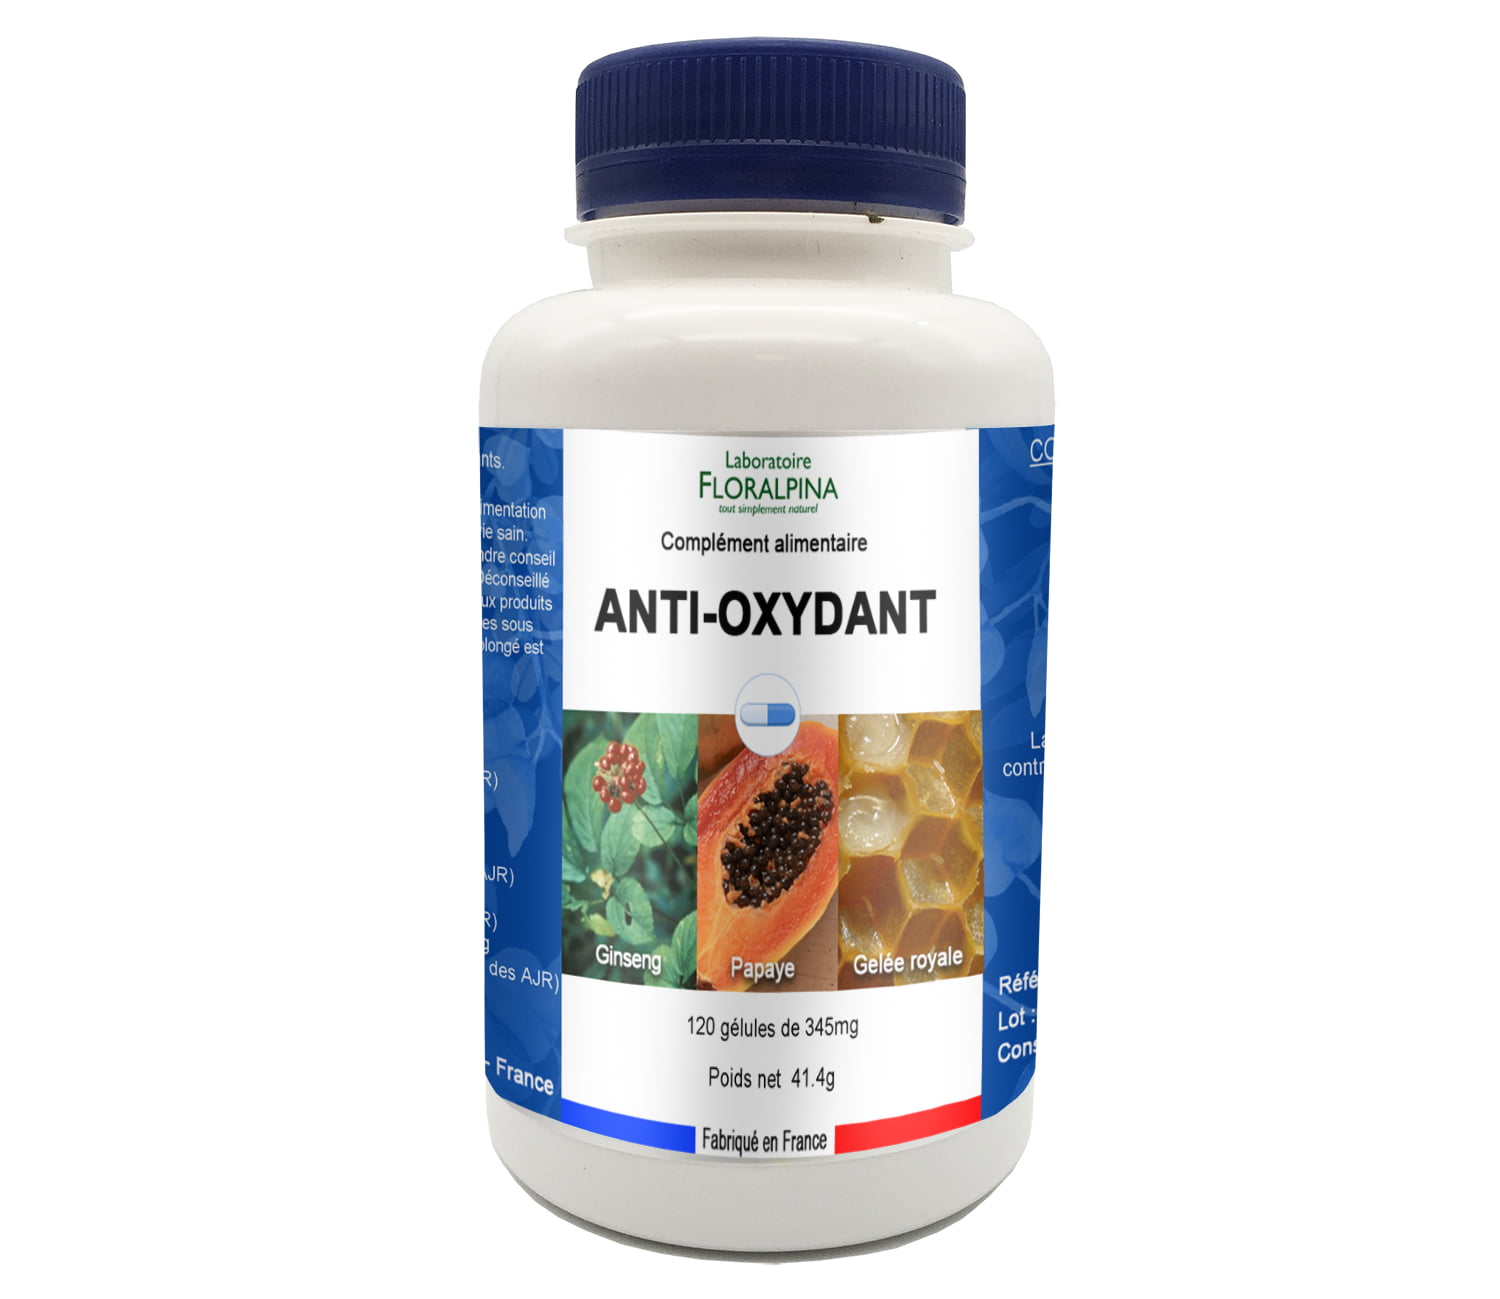 Antioxydant complement alimentaire